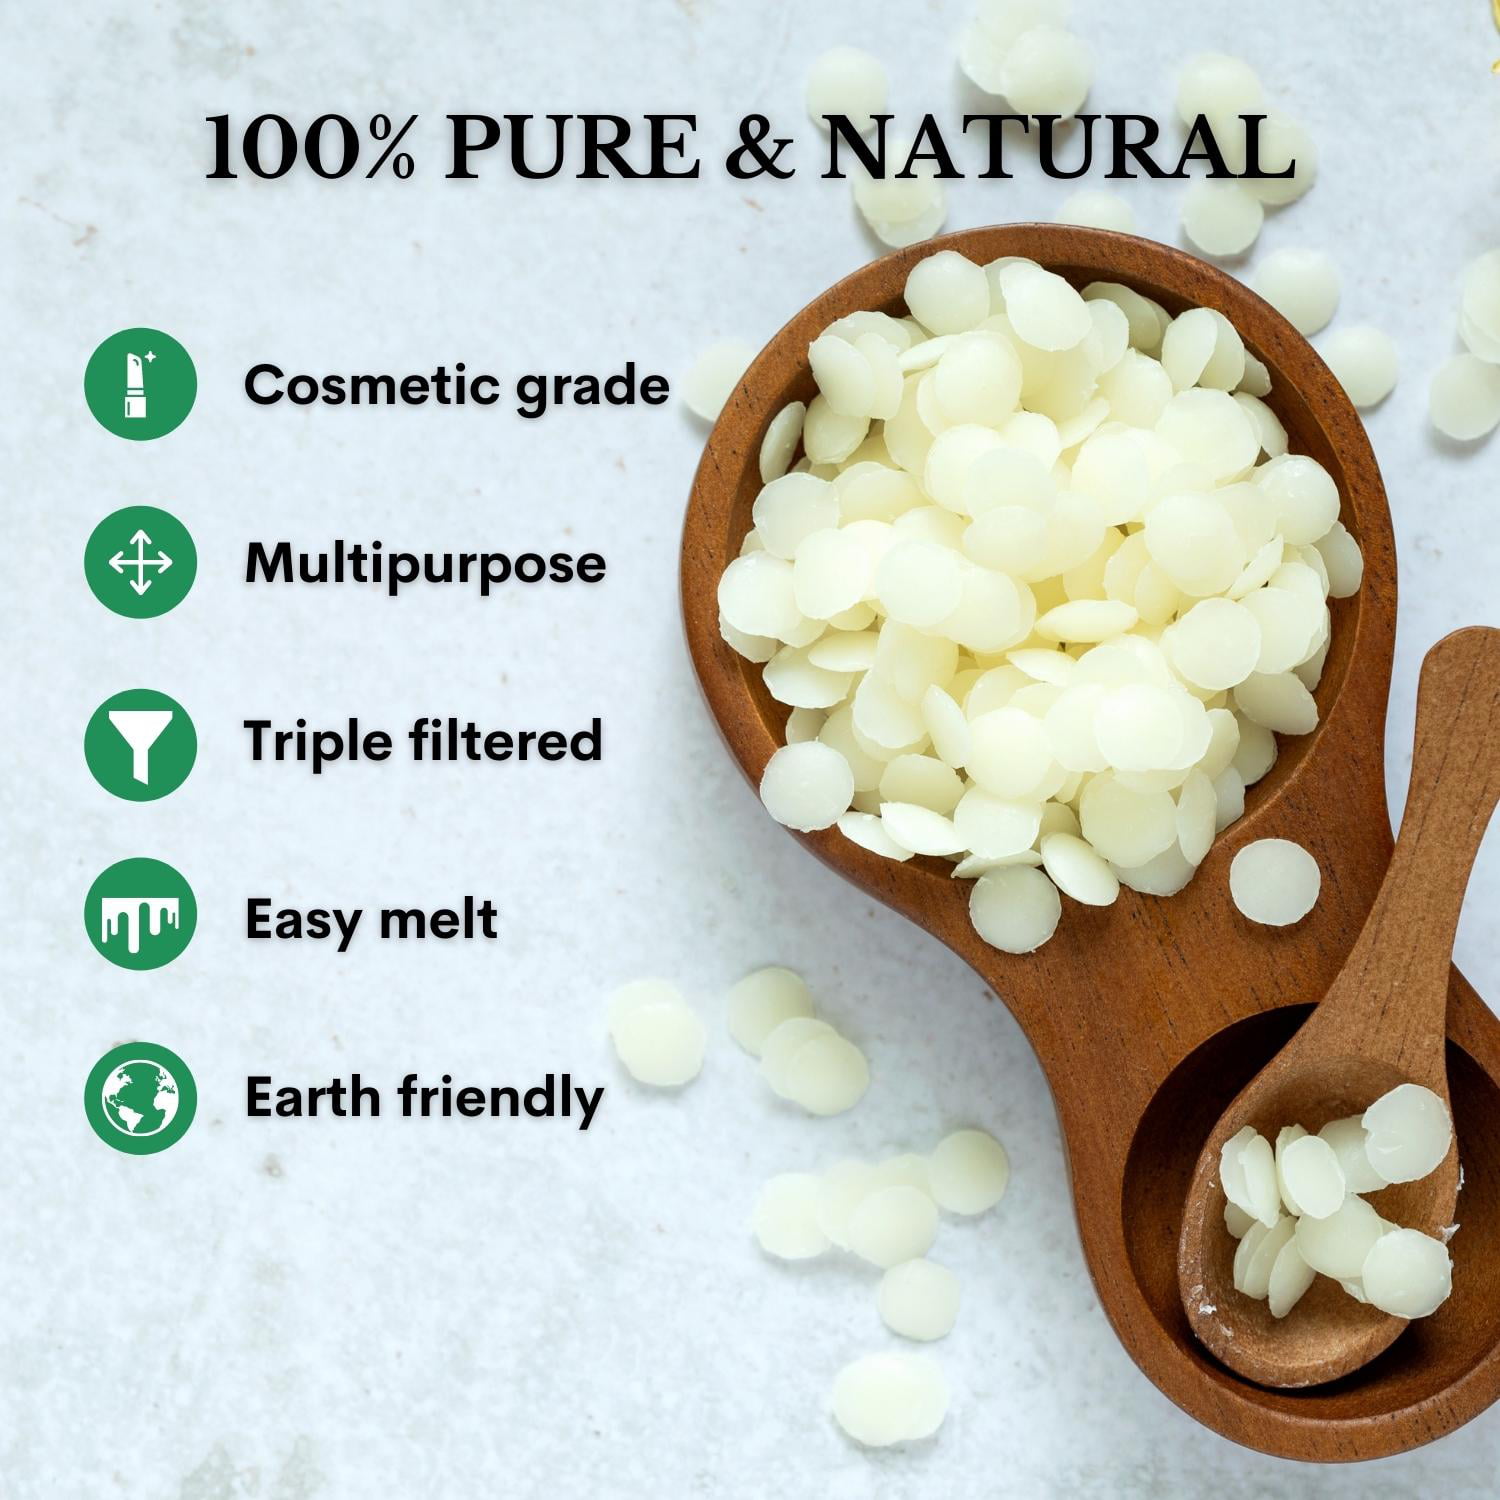 Organic Yellow Beeswax Pellets 22lb, Pure, Natural, Cosmetic Grade Bees wax,  Triple Filtered, Great For Diy Lip Balm, Lotions and More! - White Naturals